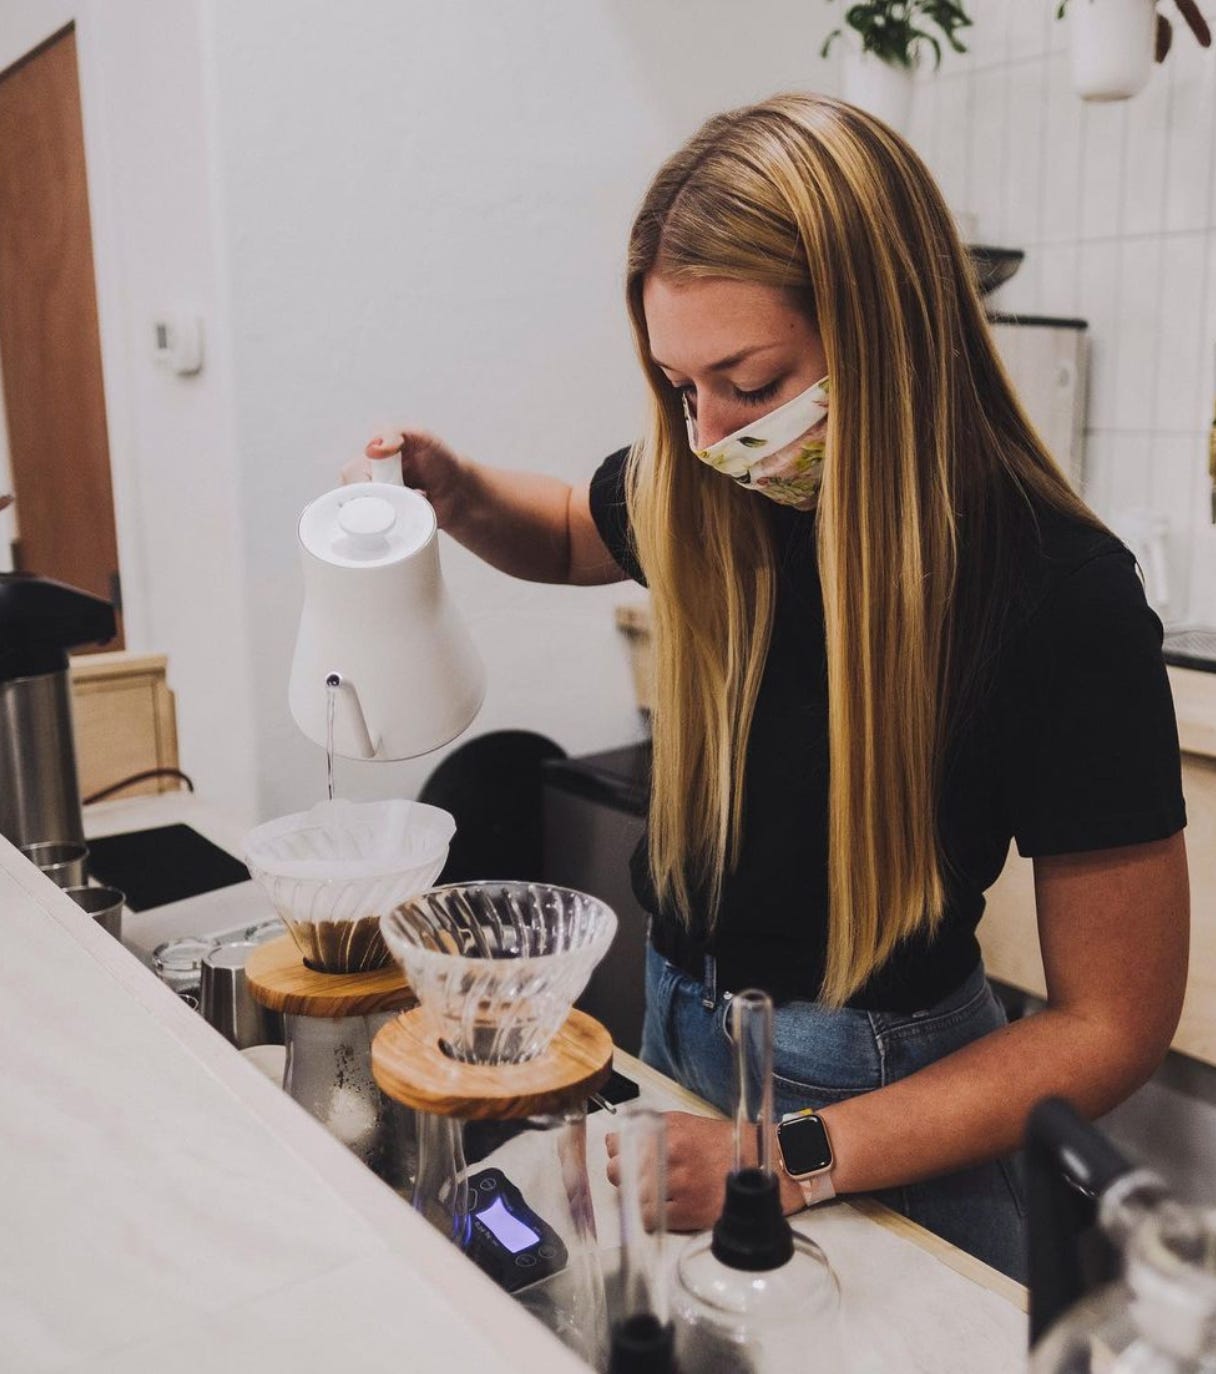 A barista pours hot water from a white goose necked pitcher into a v60 coffee brewer while standing behind a waist high bartop and in front of a white wall. She is wearing a mask over her nose and mouth and long blond hair hangs down framing her face.